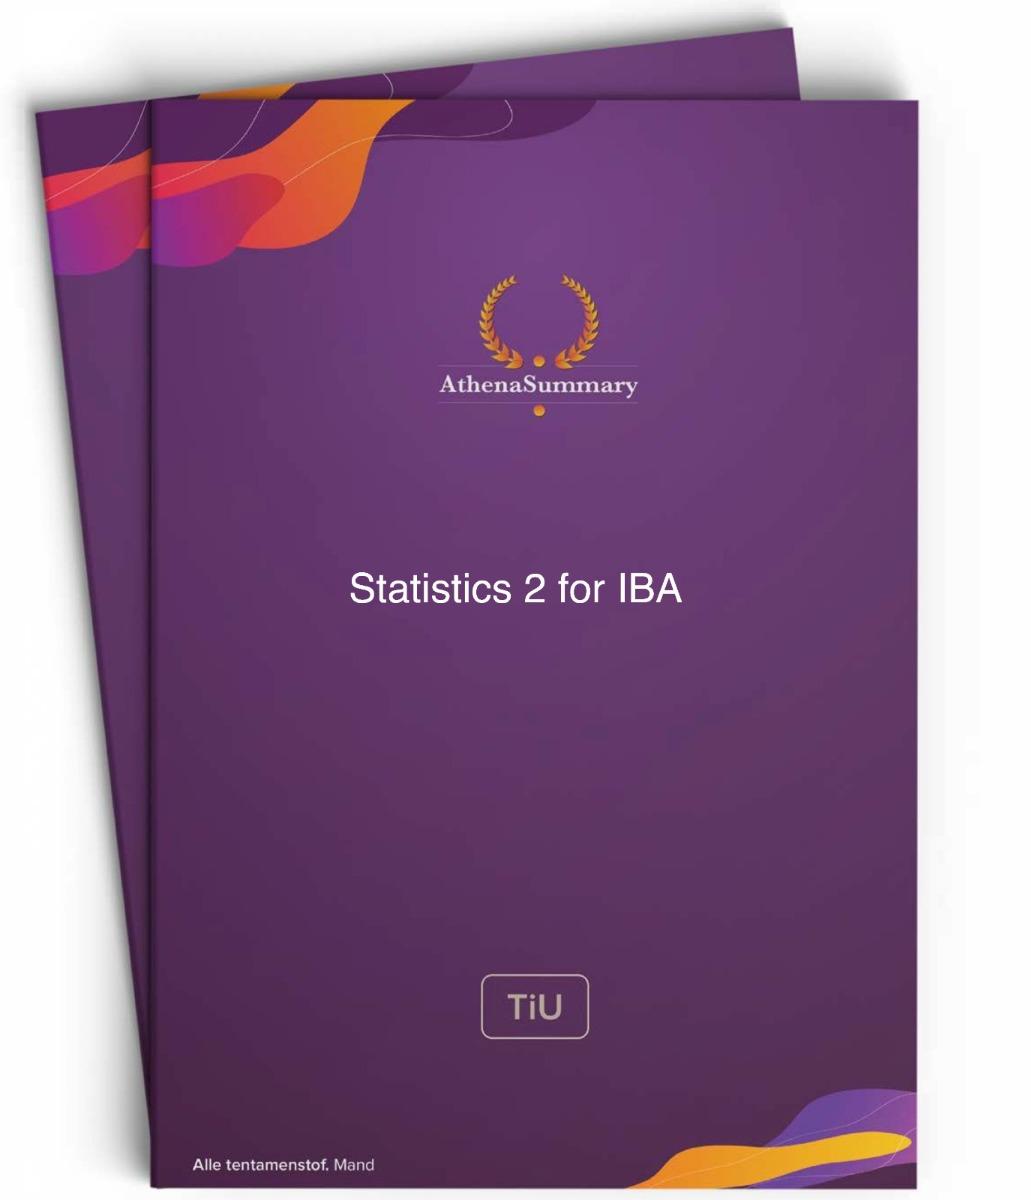 Literature and Lecture Summary: Statistics 2 for IBA